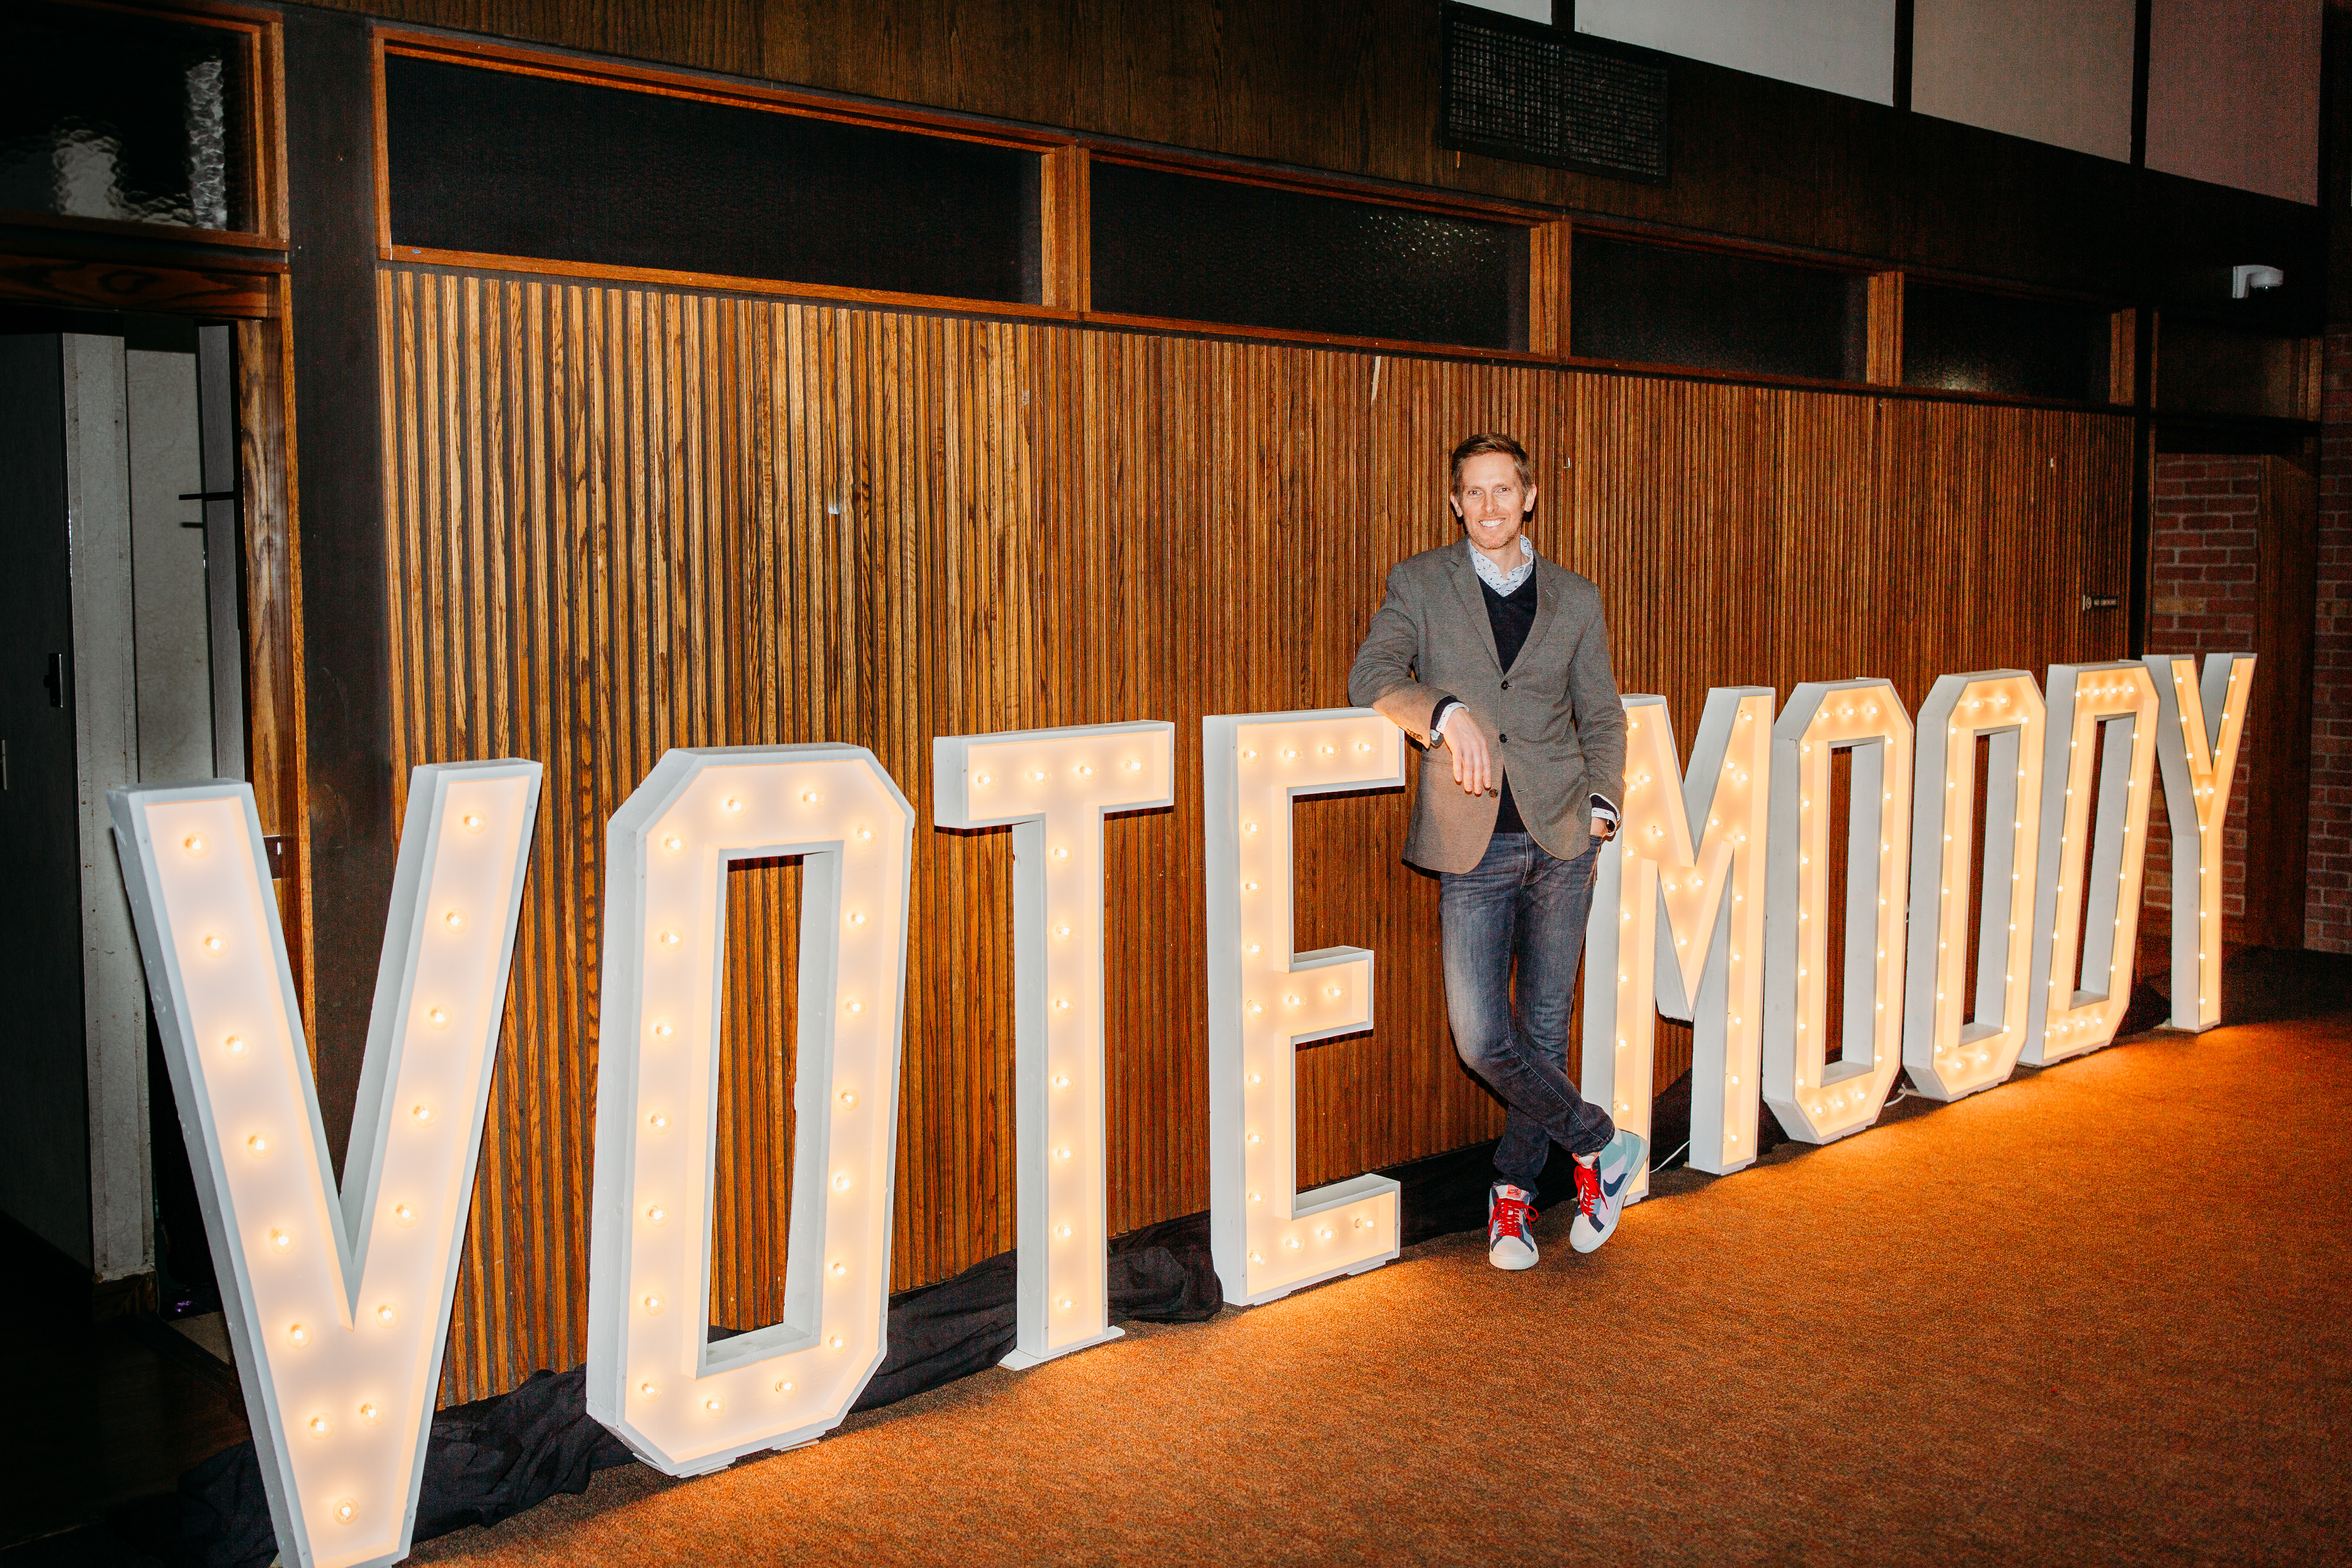 Craig Moody stands in front of tall letters that read VOTE MOODY